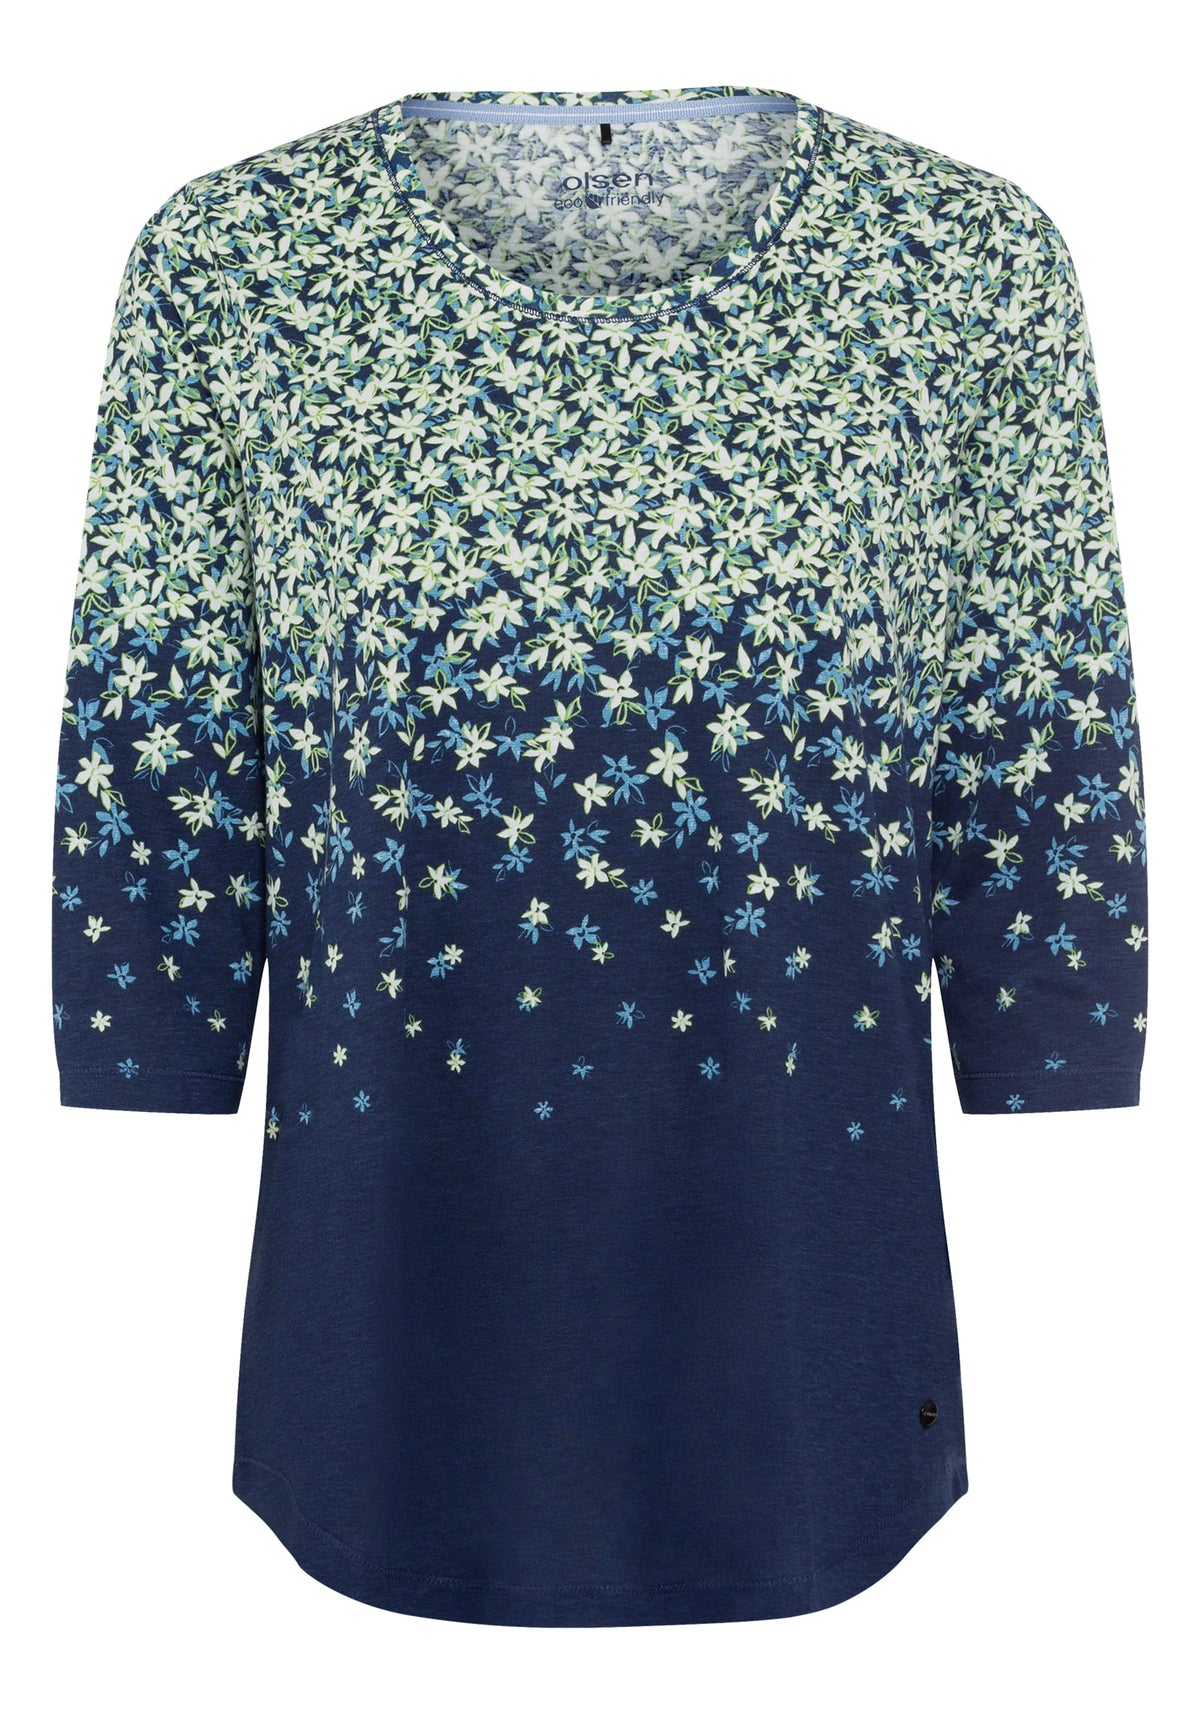 3/4 Sleeve Floral Print T-Shirt containing TENCEL™ Modal